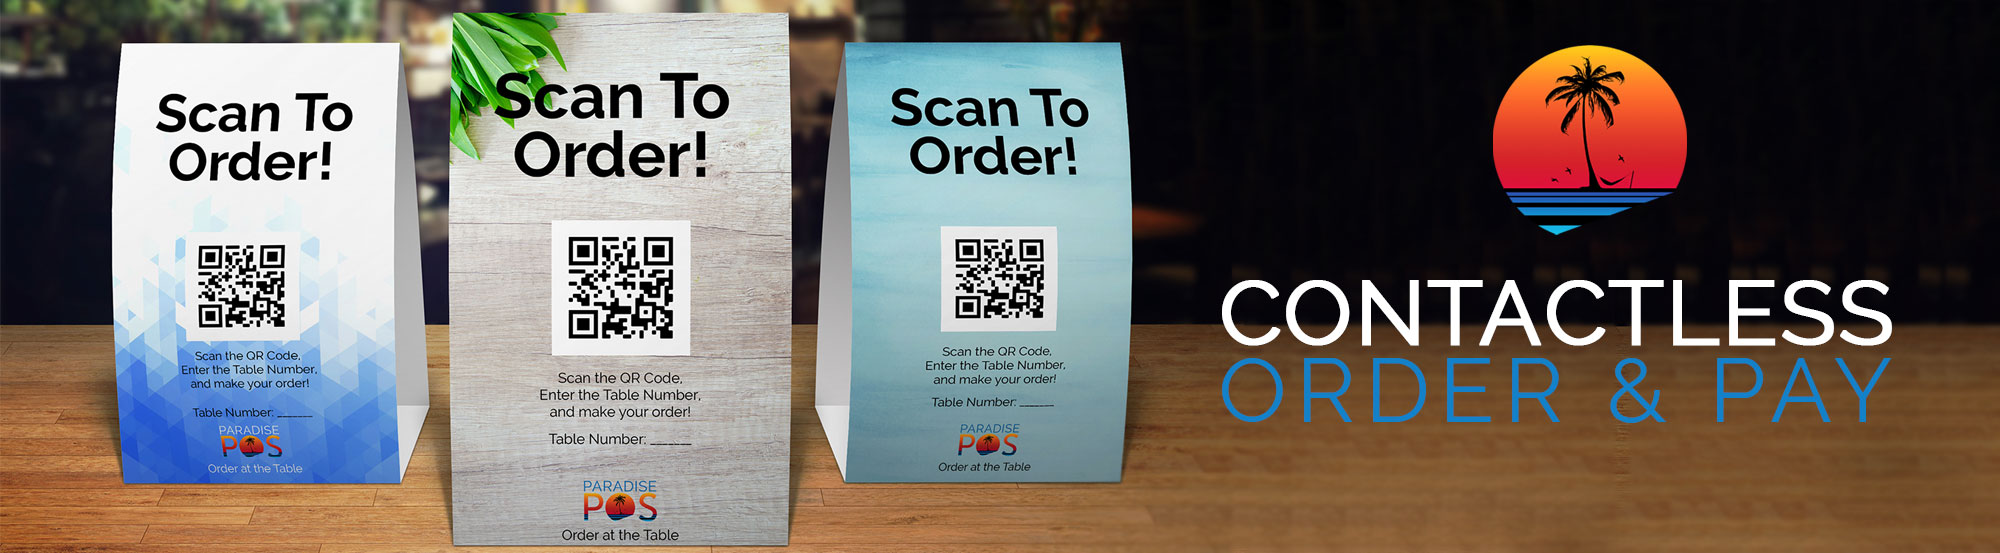 paradise pos contactless order and pay is available now